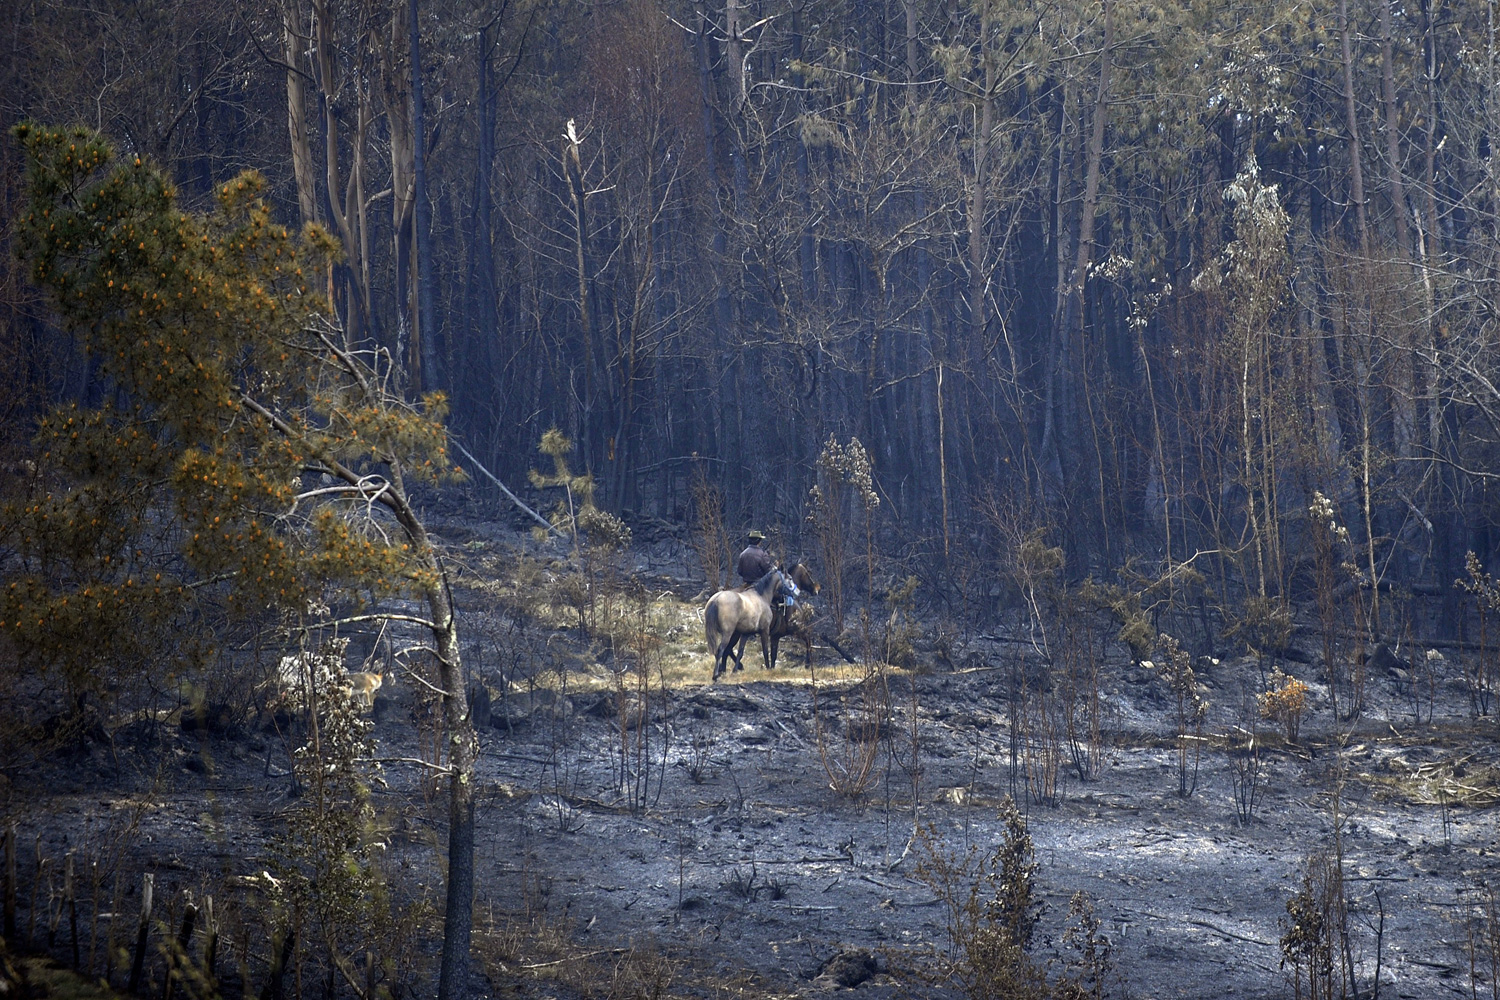 April 2, 2012. A villager rides his horse by a burned forest in A Capela, in the northwestern Galicia region, Spain.